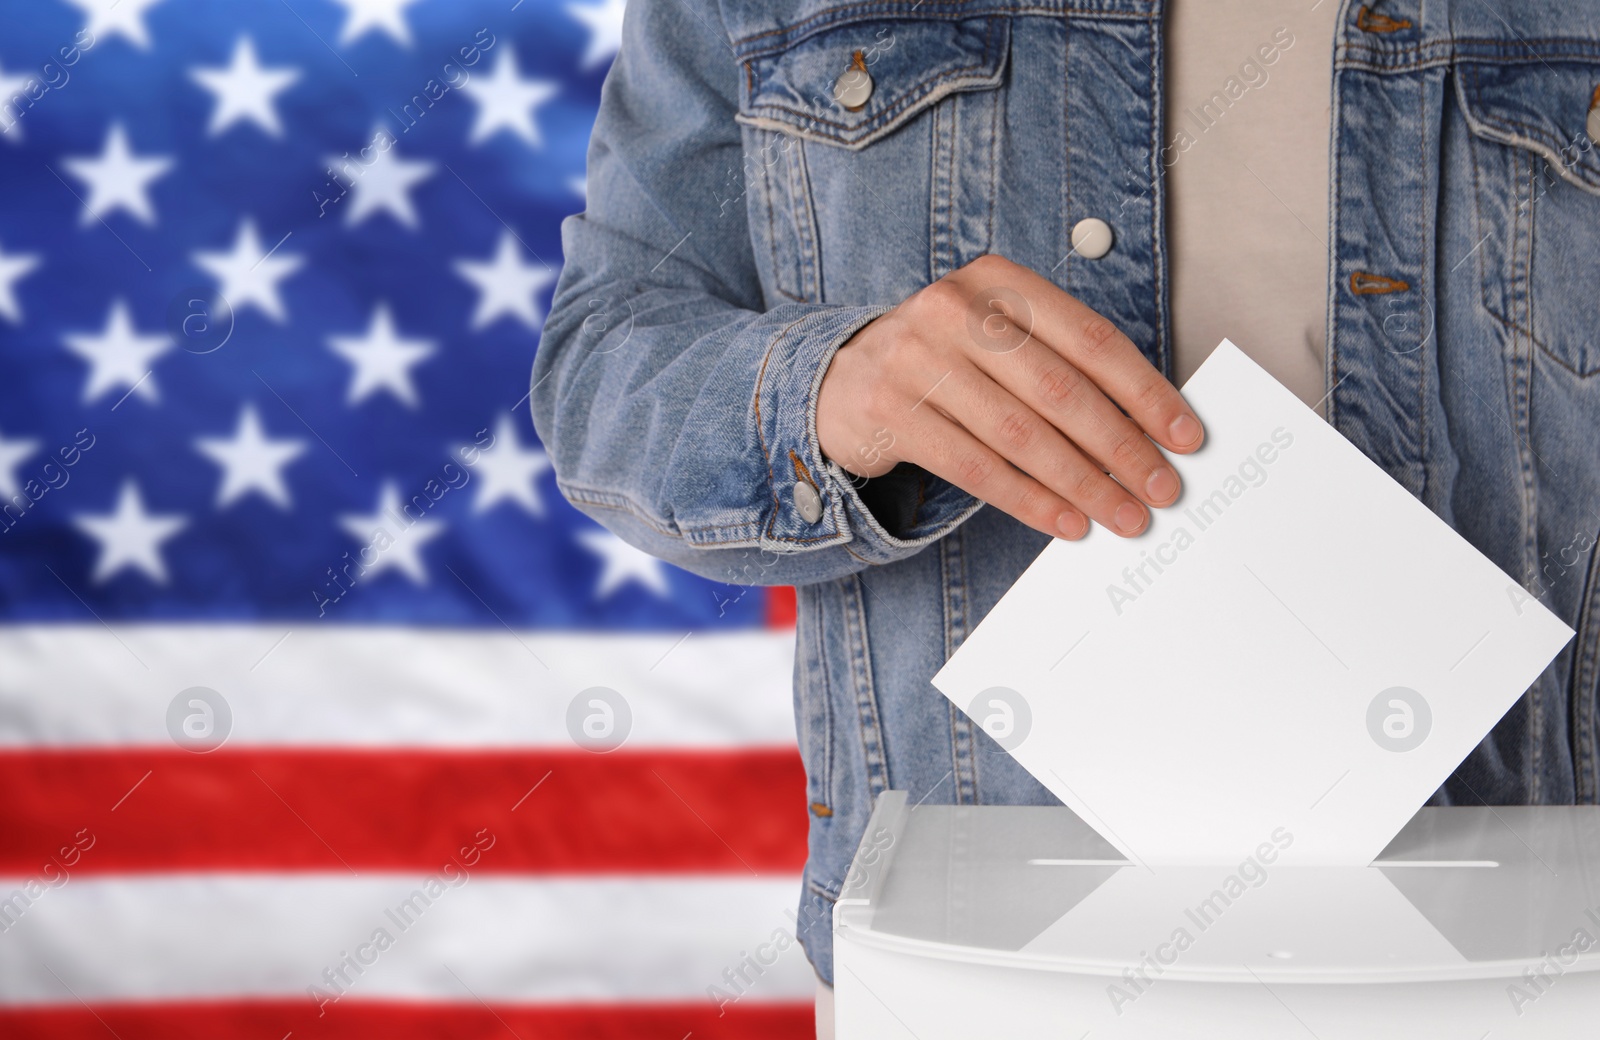 Image of Election in USA. Man putting his vote into ballot box against national flag of United States, closeup. Space for text